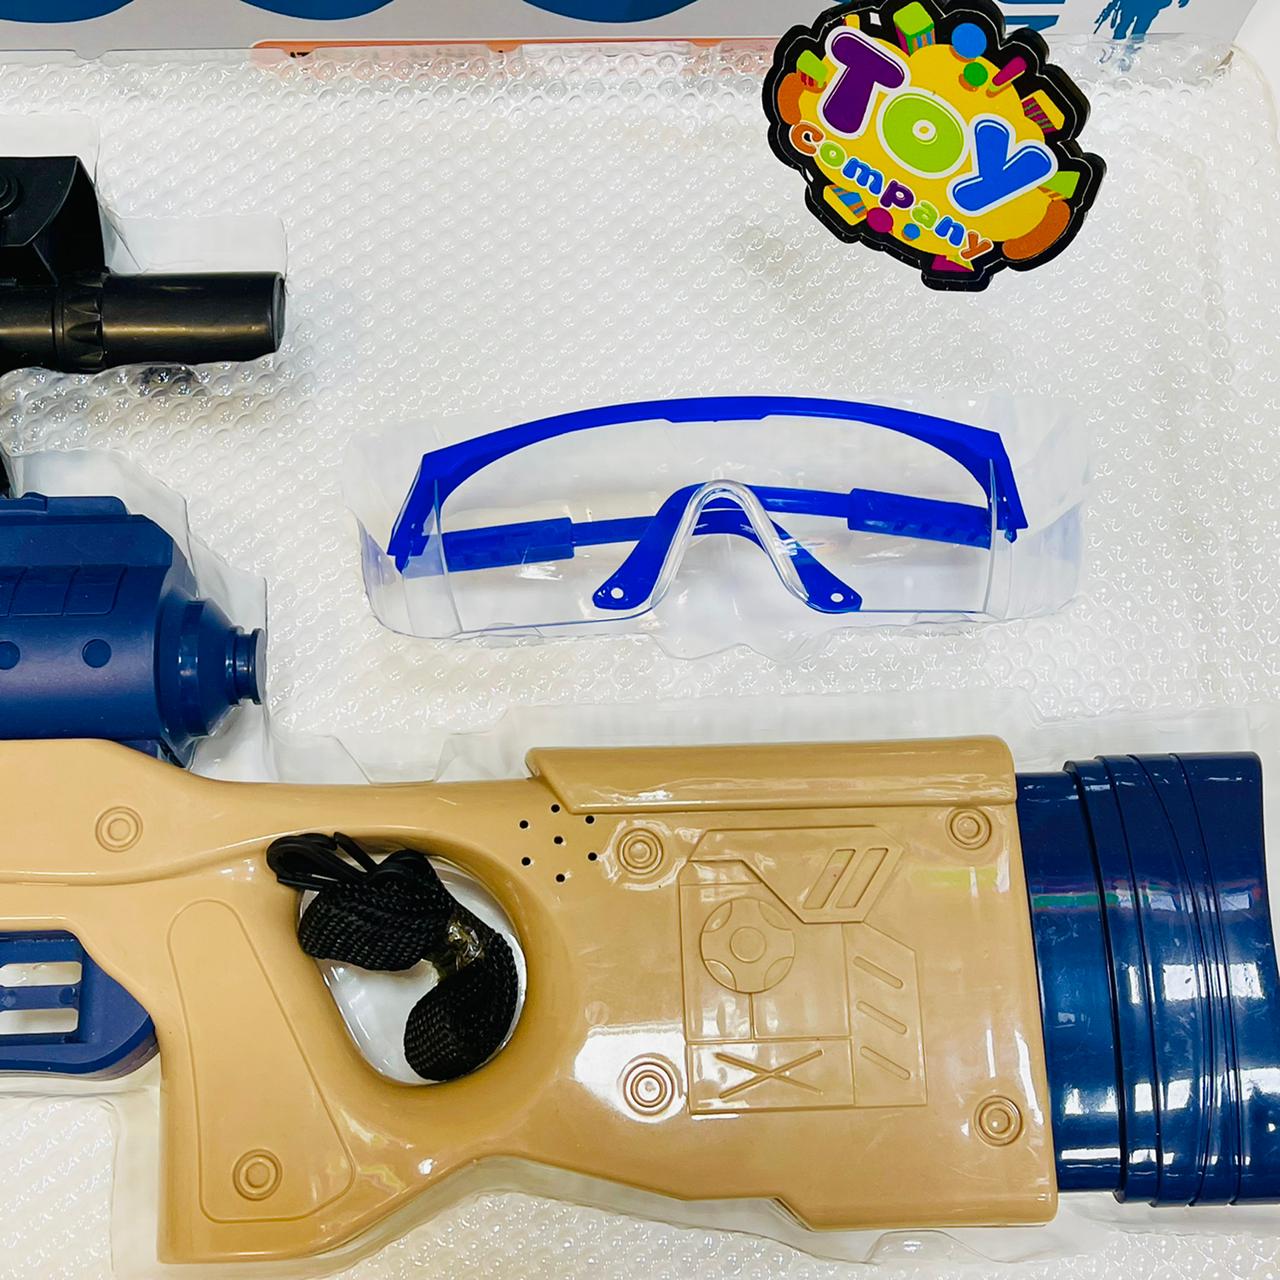 Transcend Future Gun with Soft Bullets, Targets & Safety Goggles